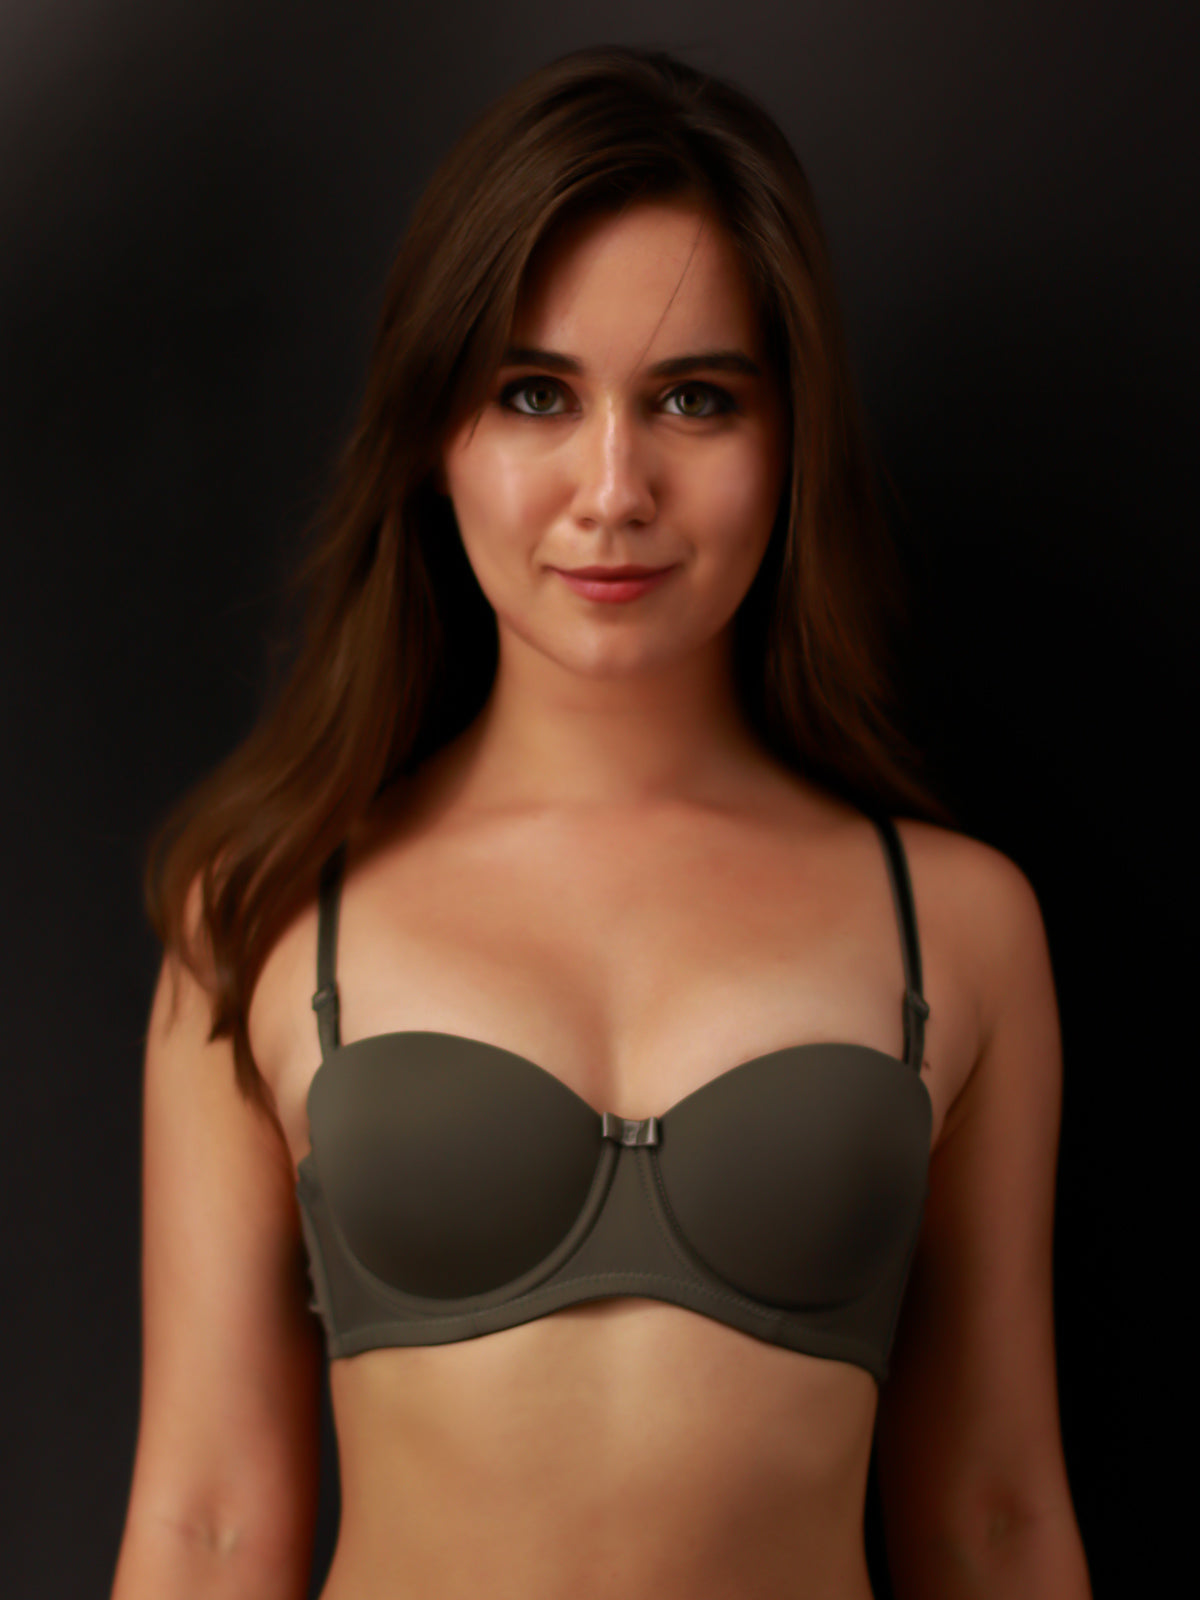 Bra types in Sri Lanka, Price, and recommendations